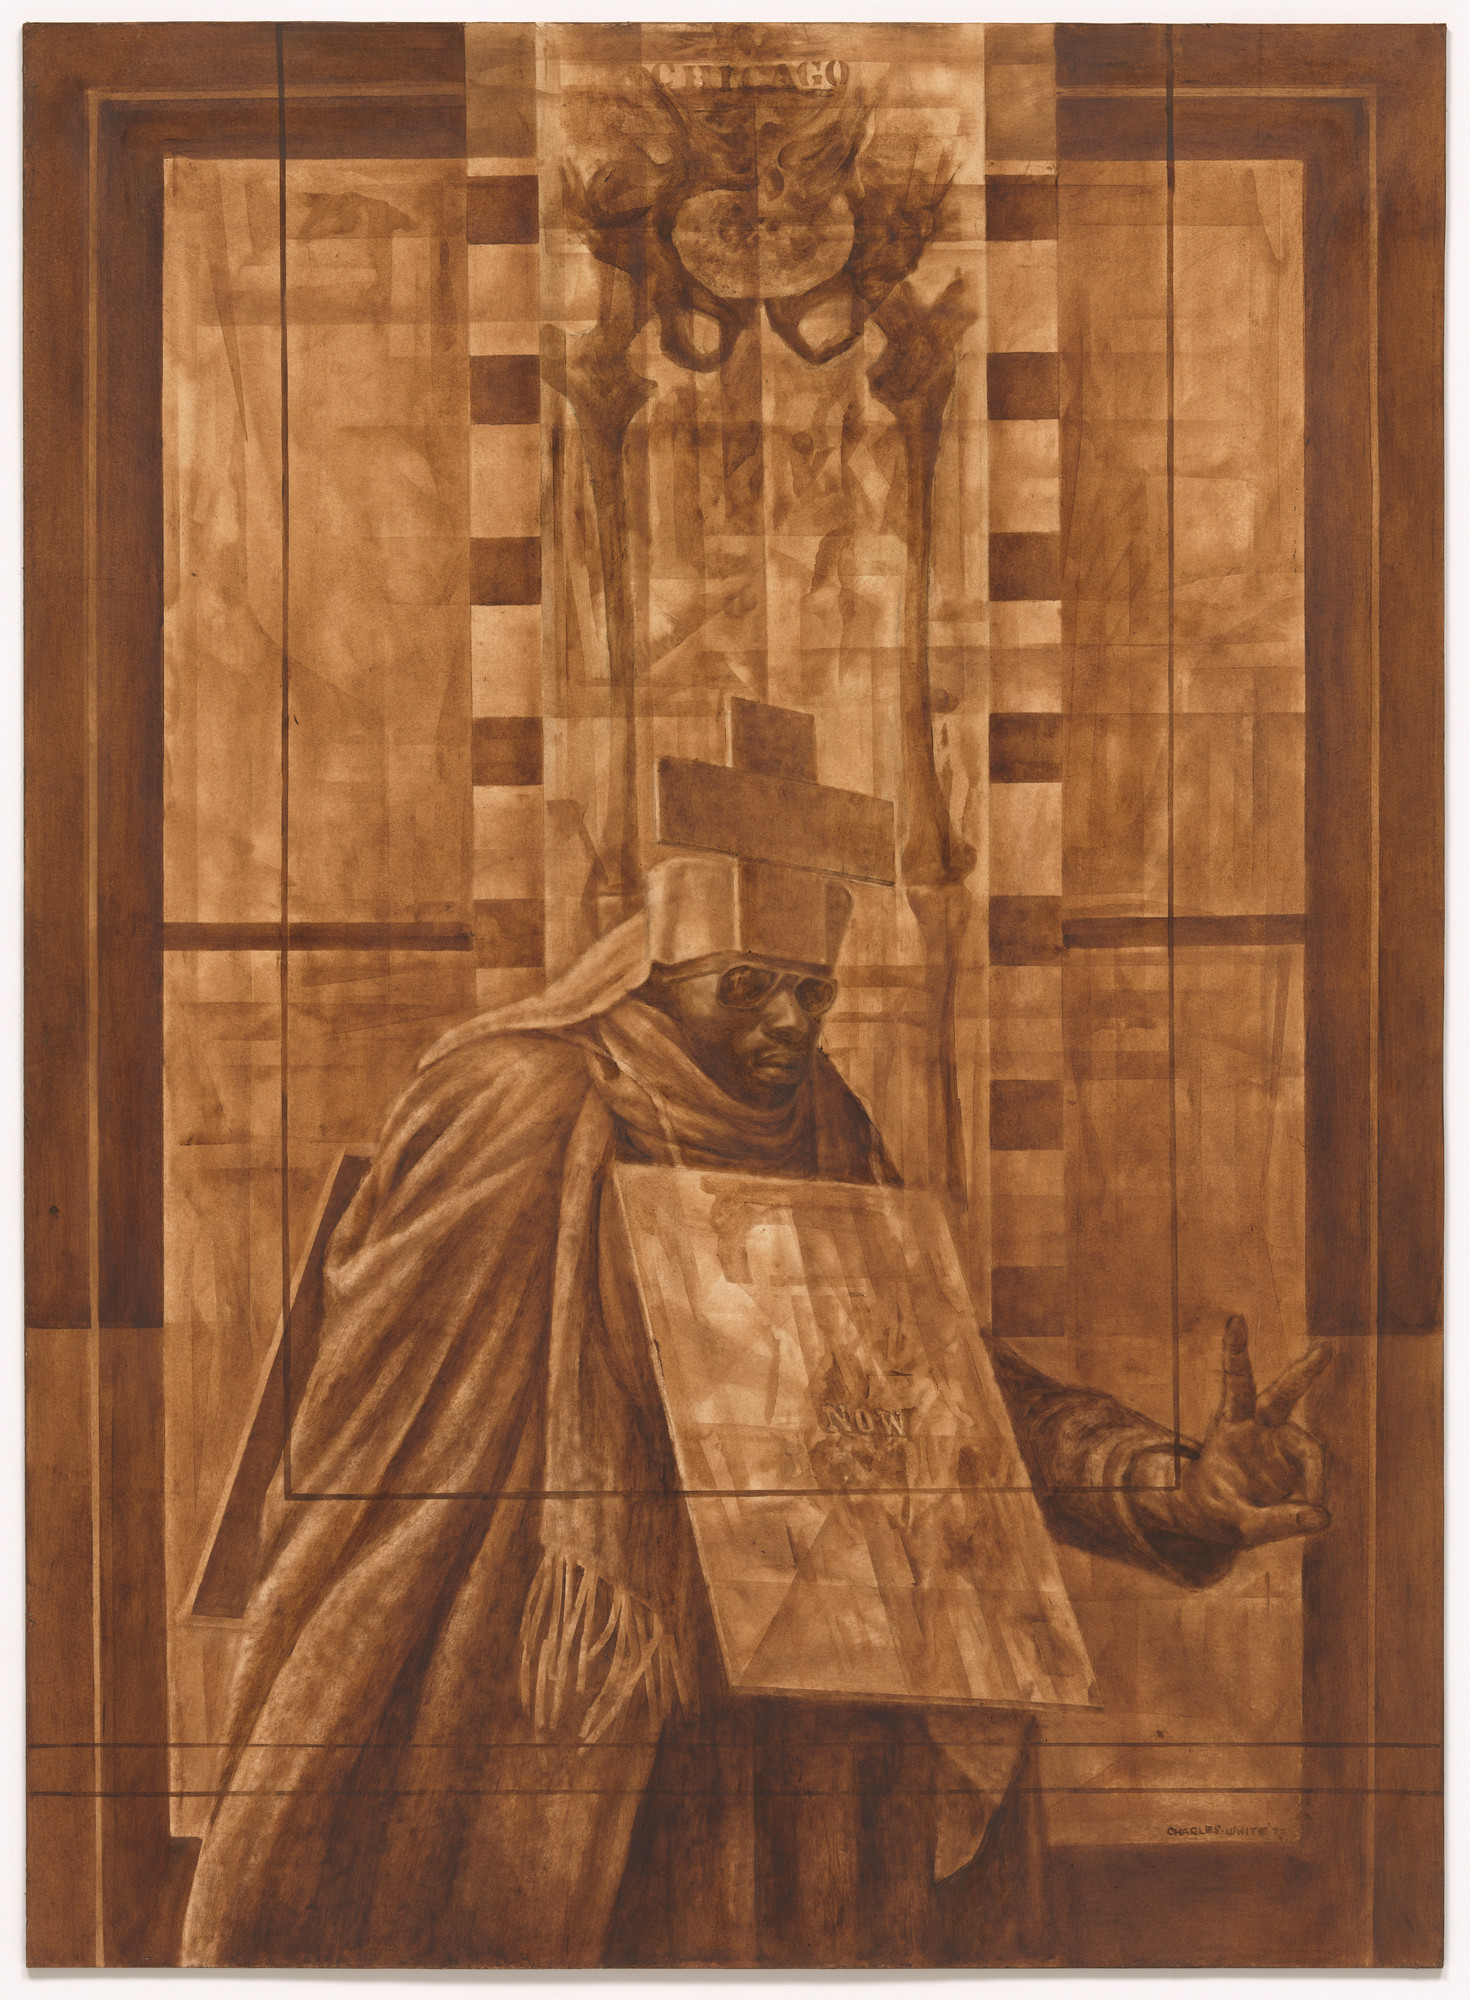 Charles White. _Black Pope (Sandwich Board Man)_. 1973. Oil wash on board, 60 x 43 7/8 (152.4 x 111.4 cm). The Museum of Modern Art, New York. Richard S. Zeisler Bequest (by exchange), The Friends of Education of The Museum of Modern Art, Committee on Drawings Fund, and Agnes Gund. © The Charles White Archives/ Digital Image © The Museum of Modern Art/ Licensed by SCALA/Art Resource, NY